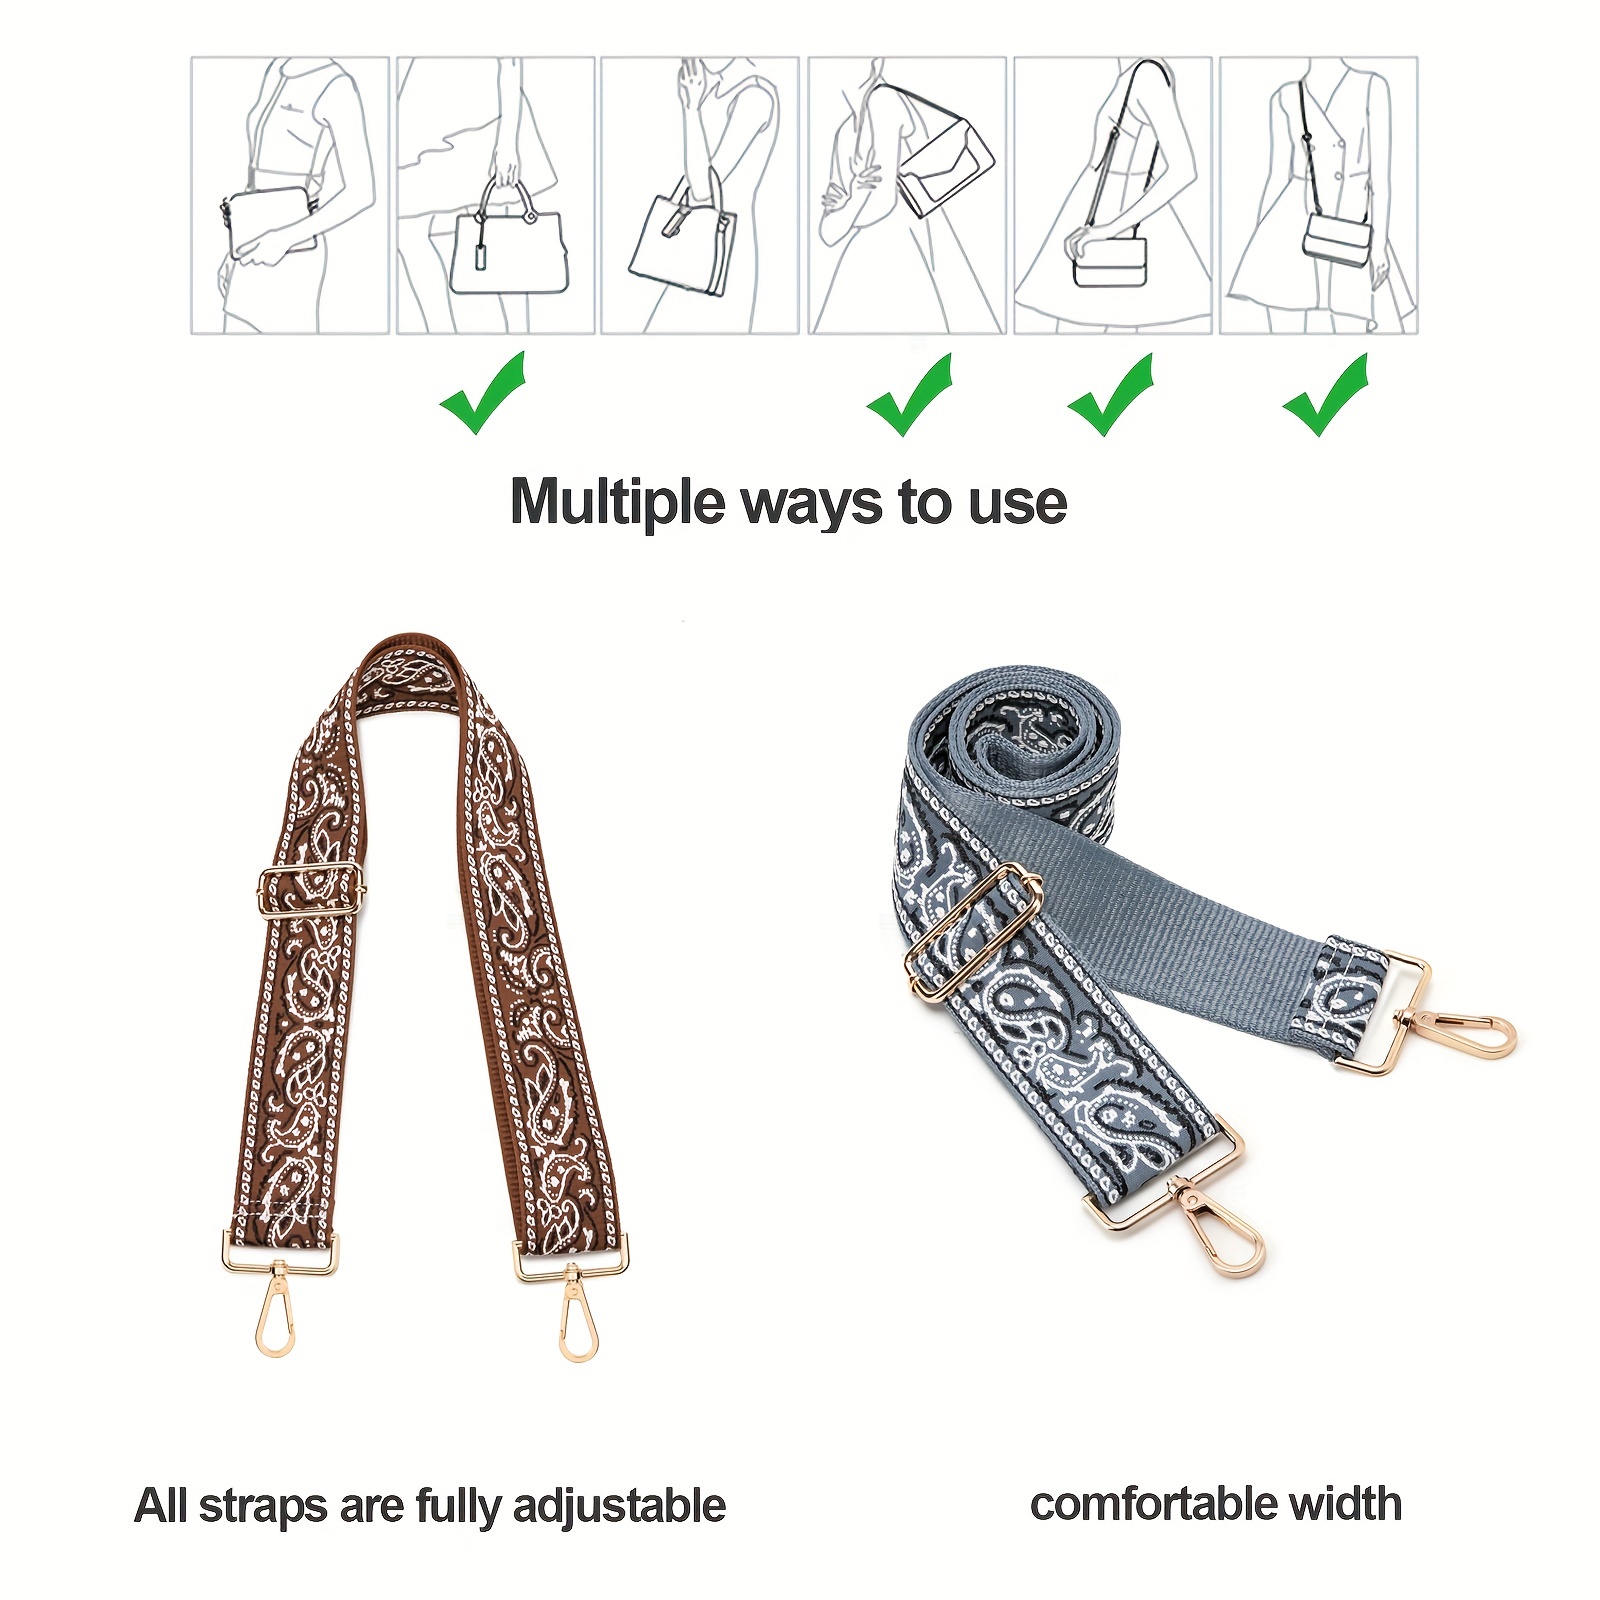 How to Make an Adjustable Strap 2 Different Ways 